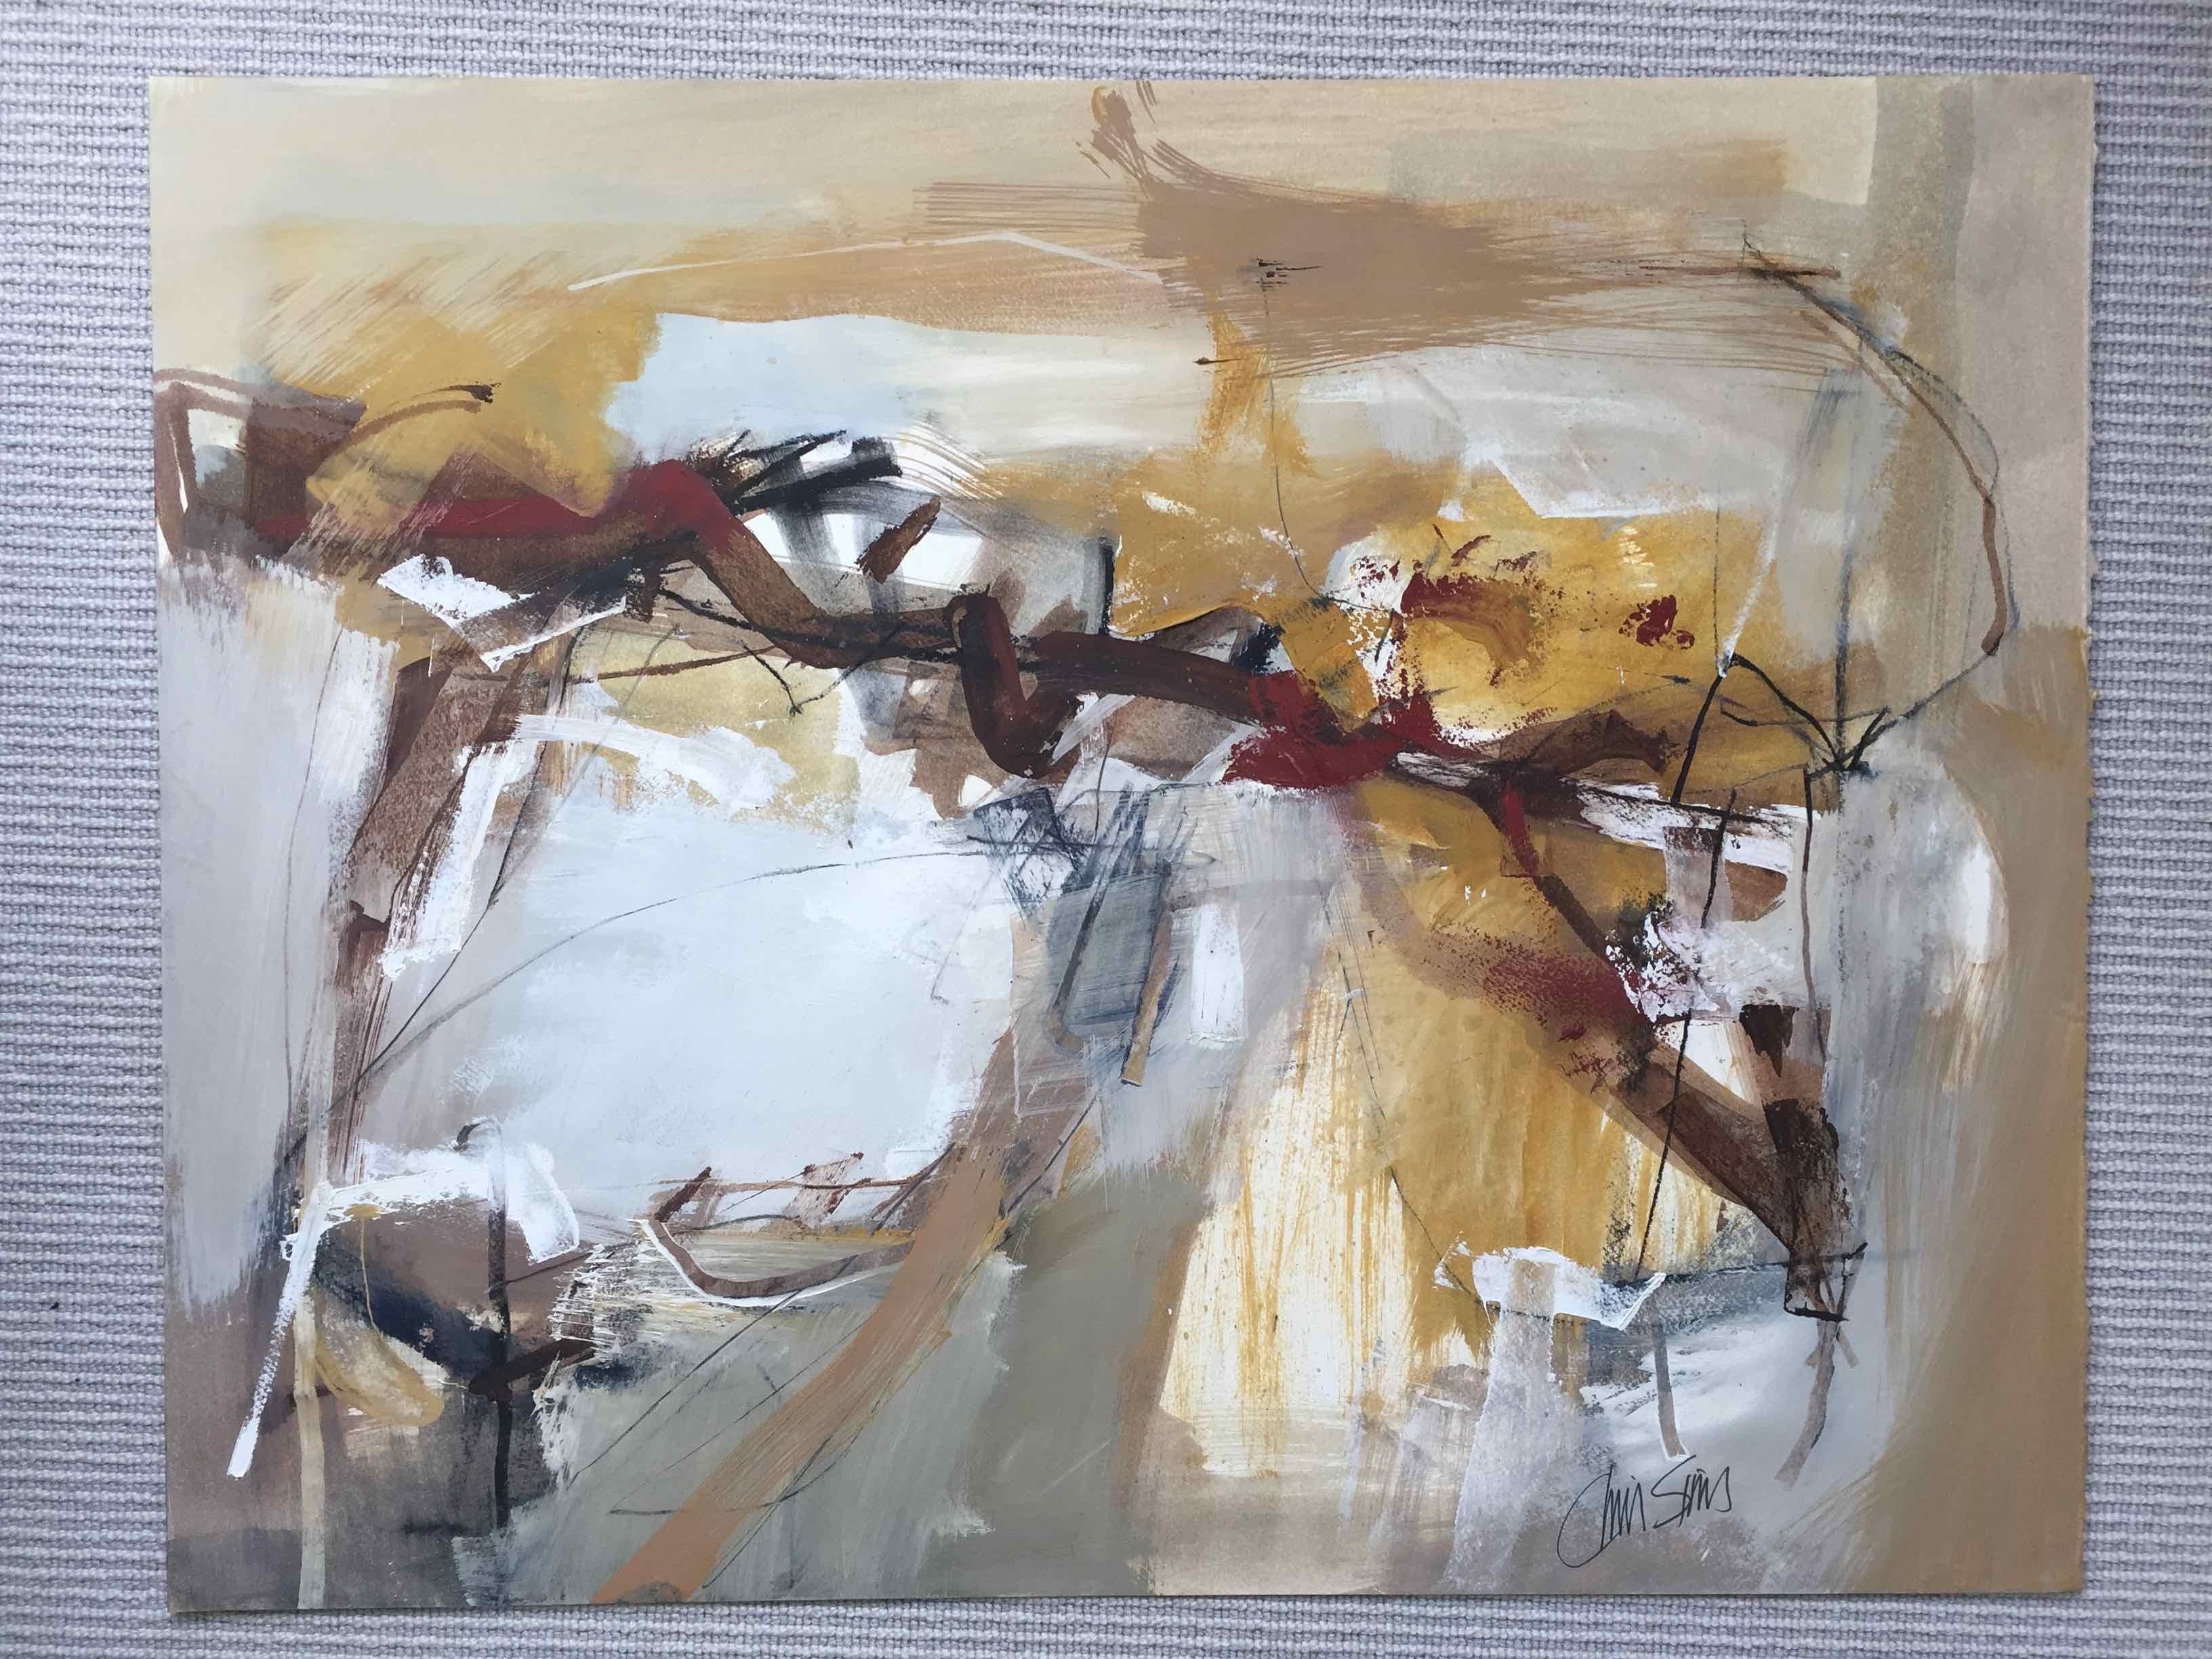 This is one of Chris Sims oil paintings on paper from his portfolio. We will frame this work for you in a narrow frame (your choice of brown, black or white frame) and glass.  It can also be delivered unframed if you prefer to do your own